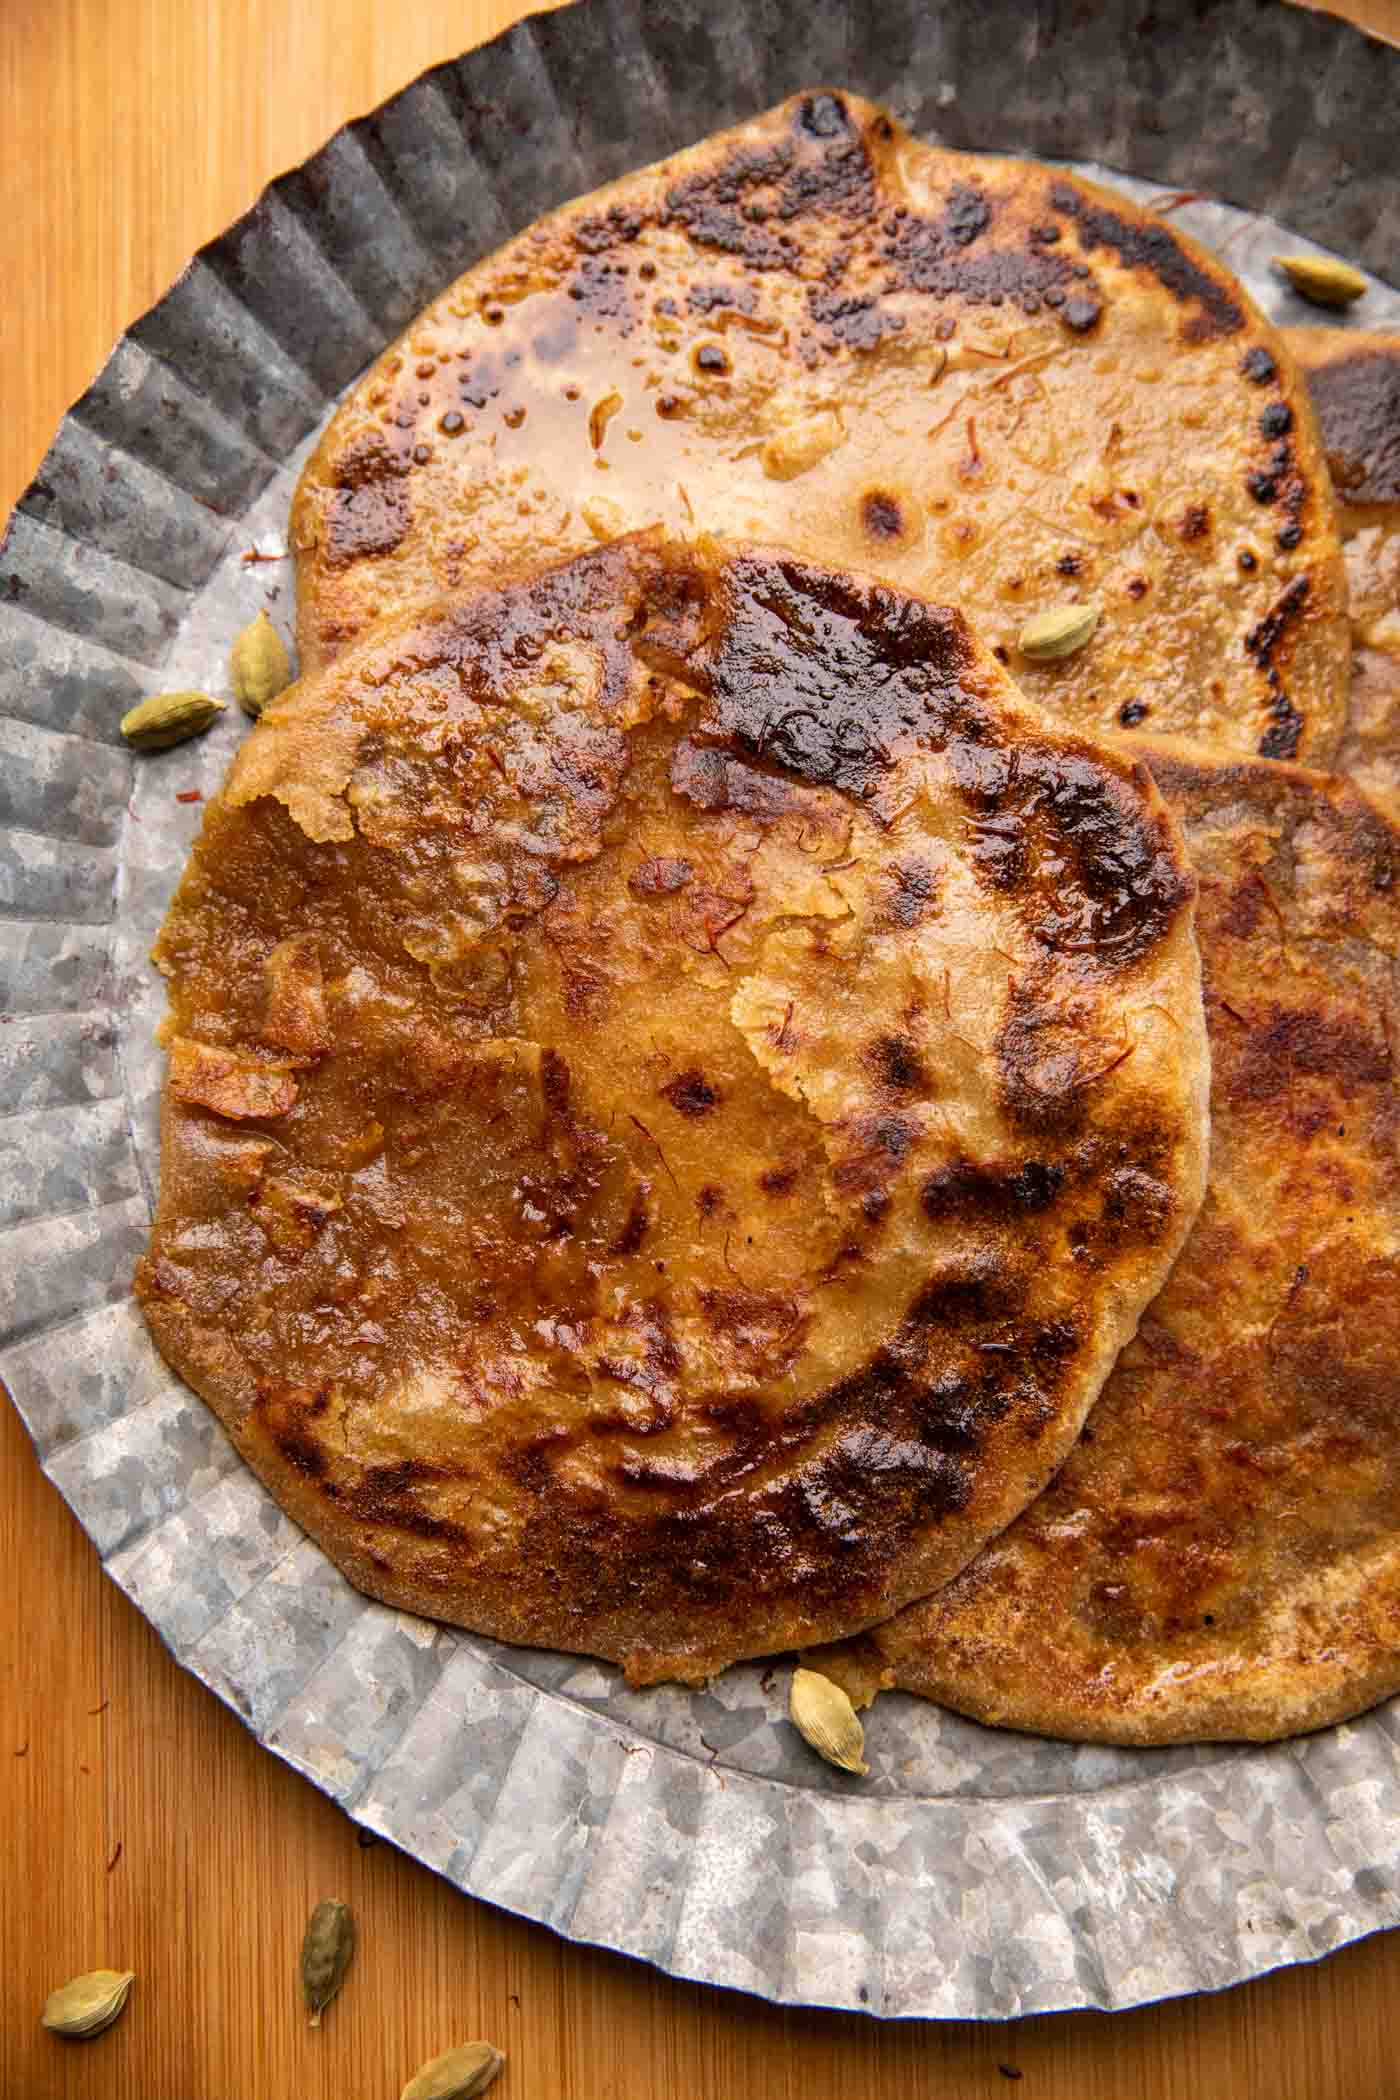 Puran polis served on a silver platter drizzled with saffron and ghee